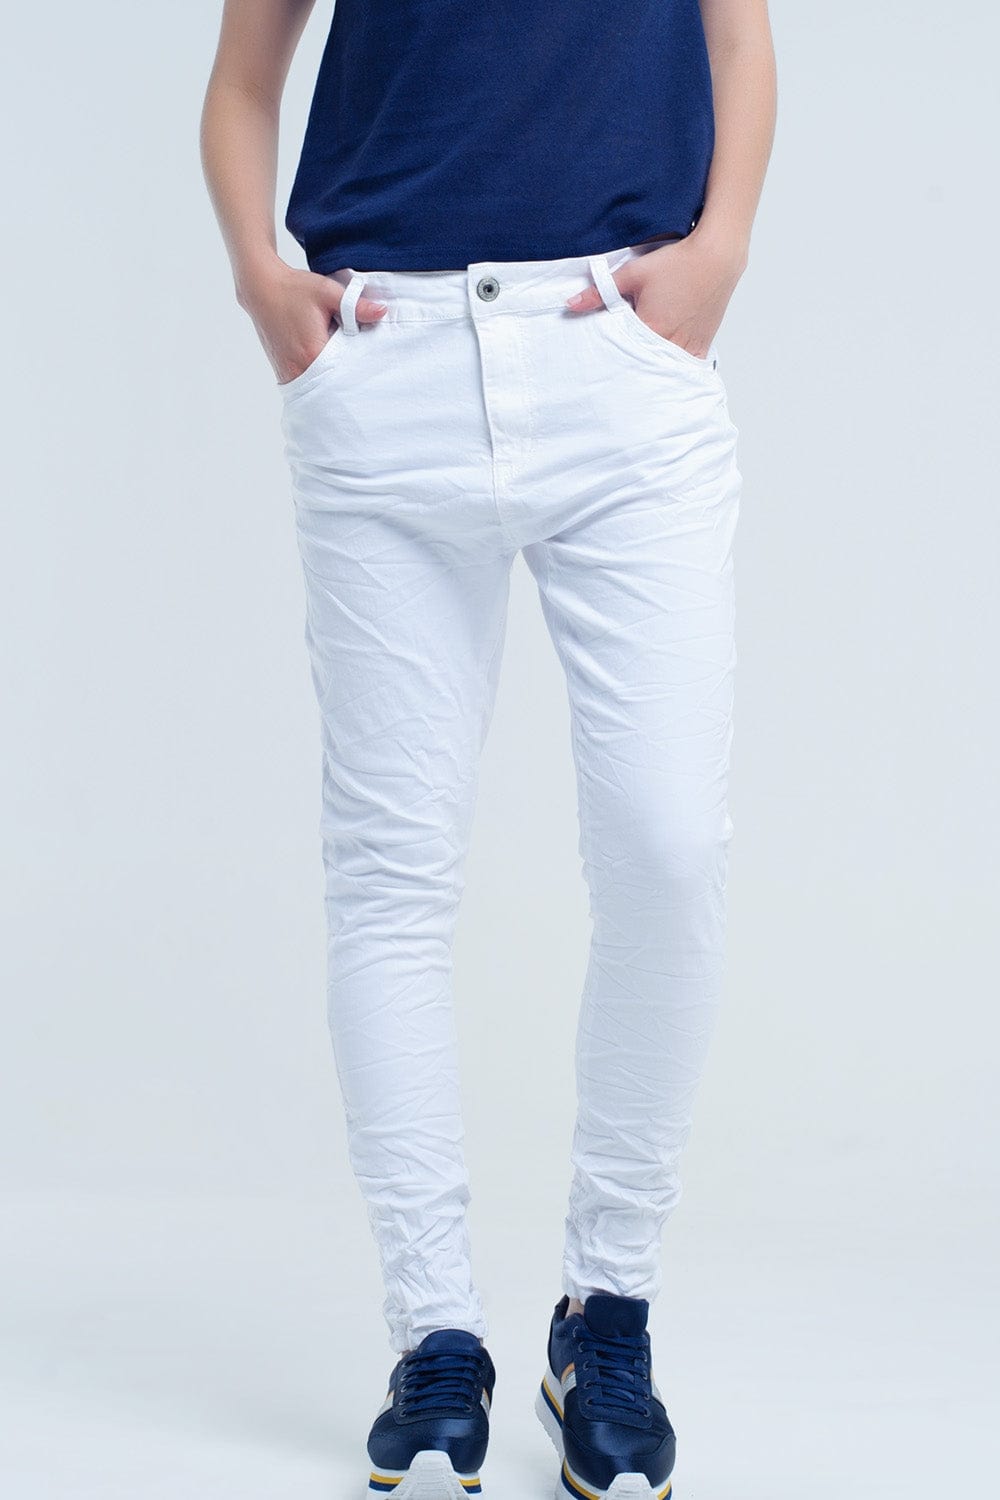 Q2 Pants Crumpled white jeans with pockets